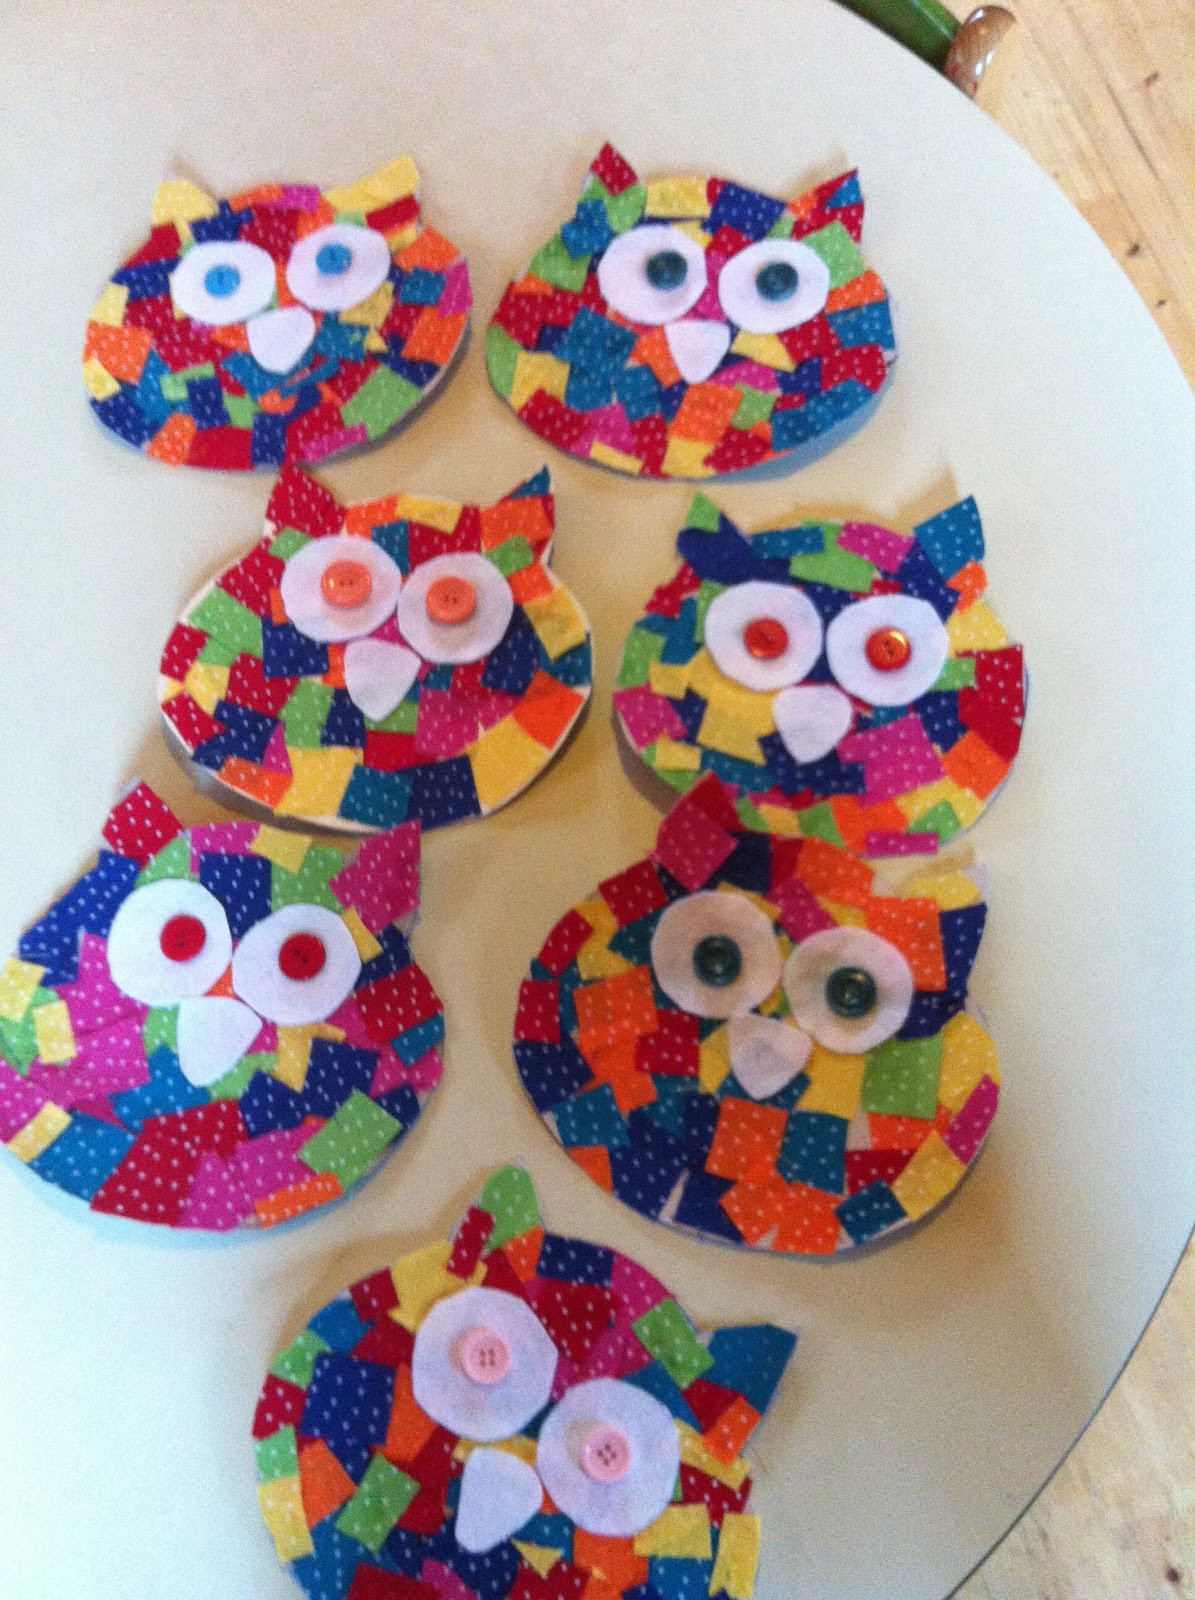 Owl Crafts For Preschoolers Unique The Guilletos Playful Learning Cute Little Owls Of Owl Crafts For Preschoolers 